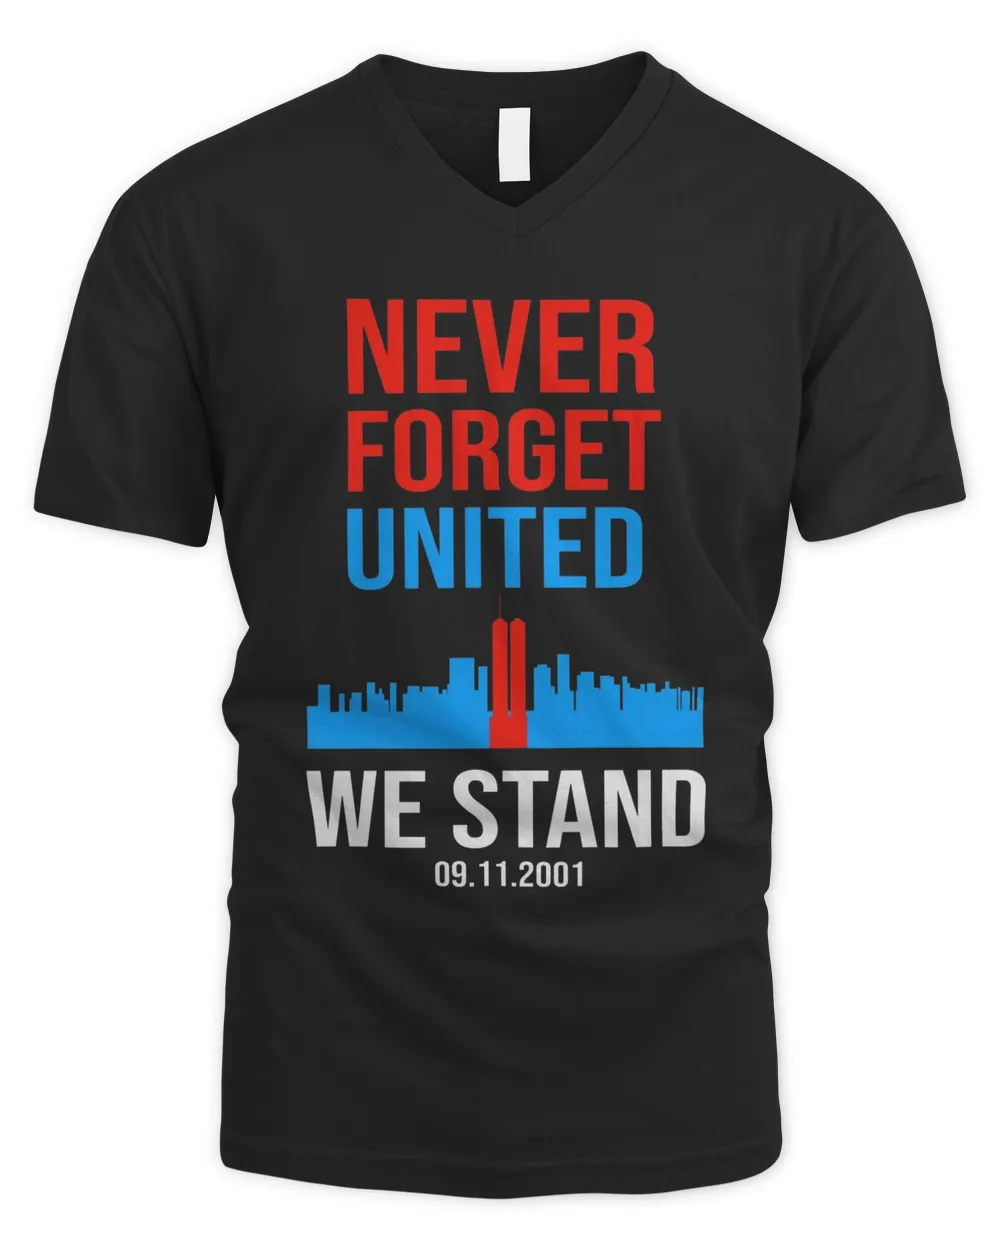 9.11 Patriot Day Never Forget United We Stand T-Shirt